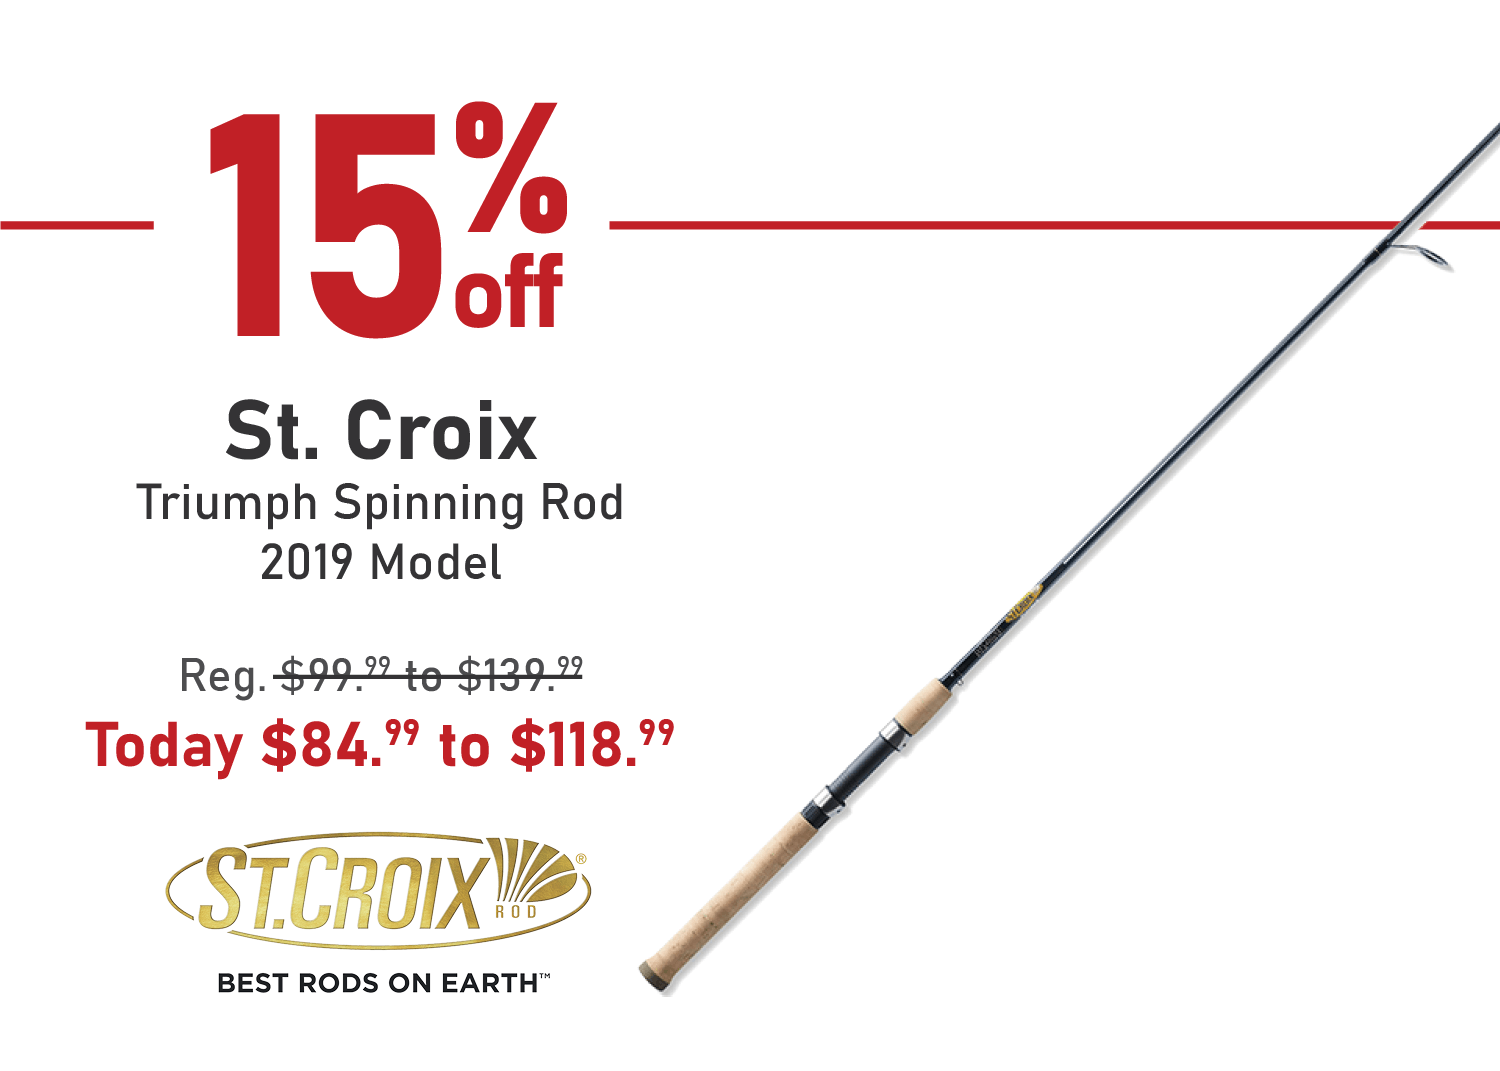 Save 15% on the St. Croix Triumph Spinning Rod - 2019 Model